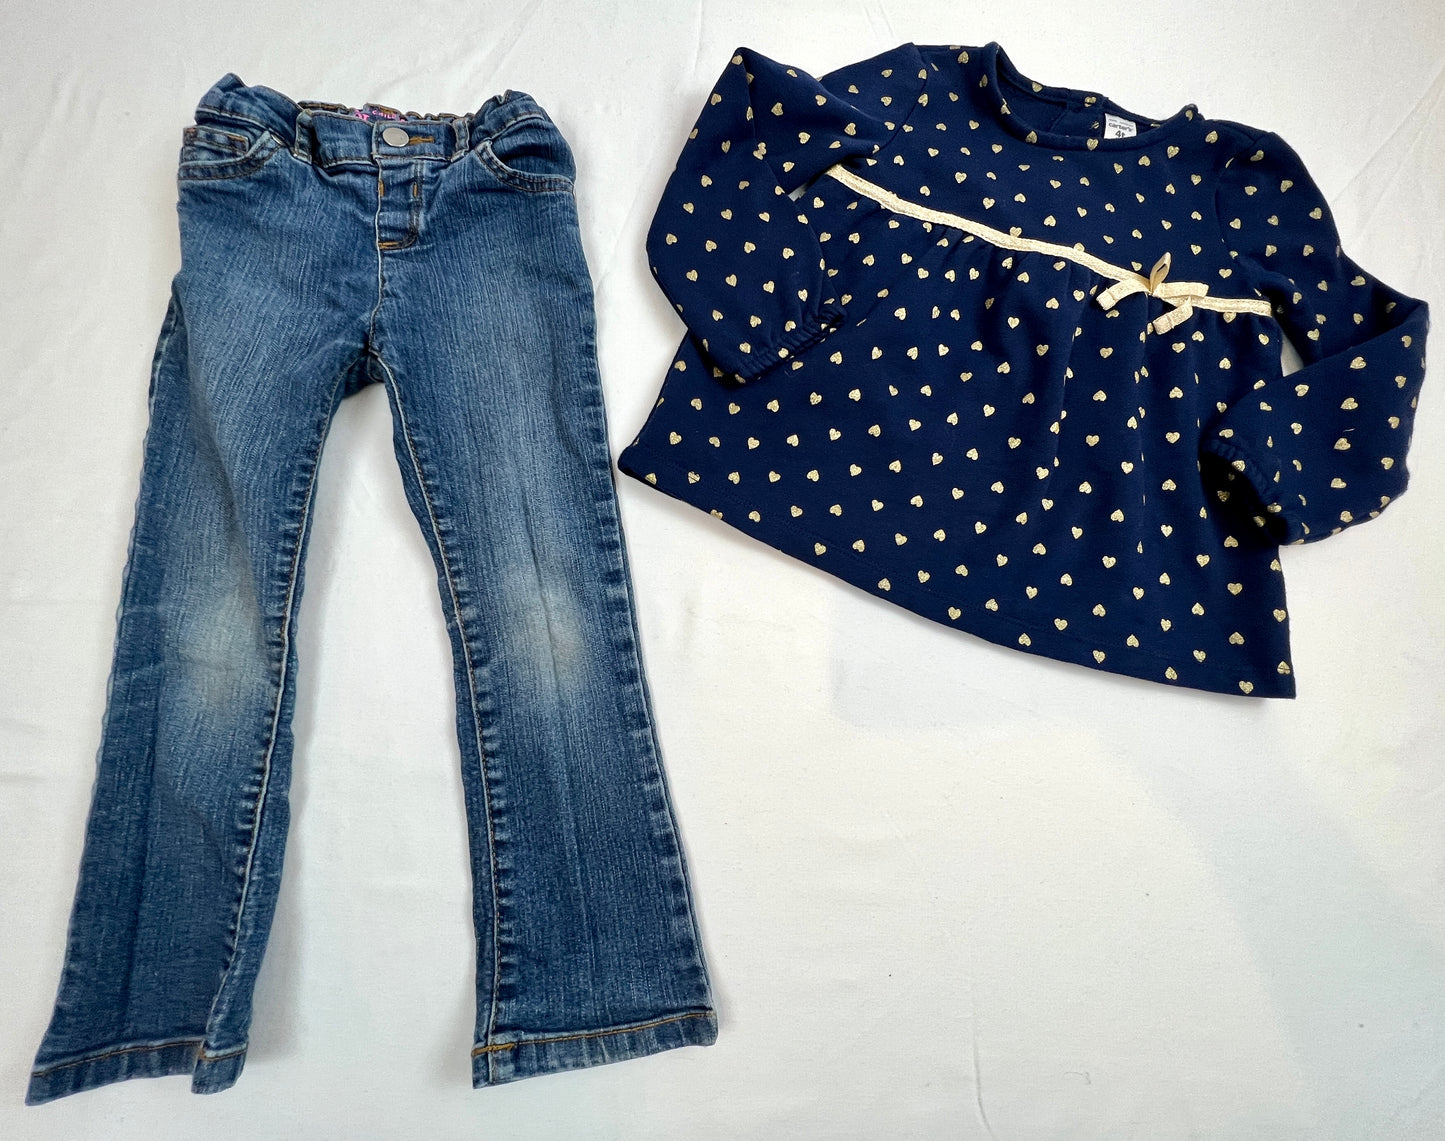 Girls 4T - Tunic Shirt with Gold Hearts + Blue Jeans with Adjustable Waist  VGUC